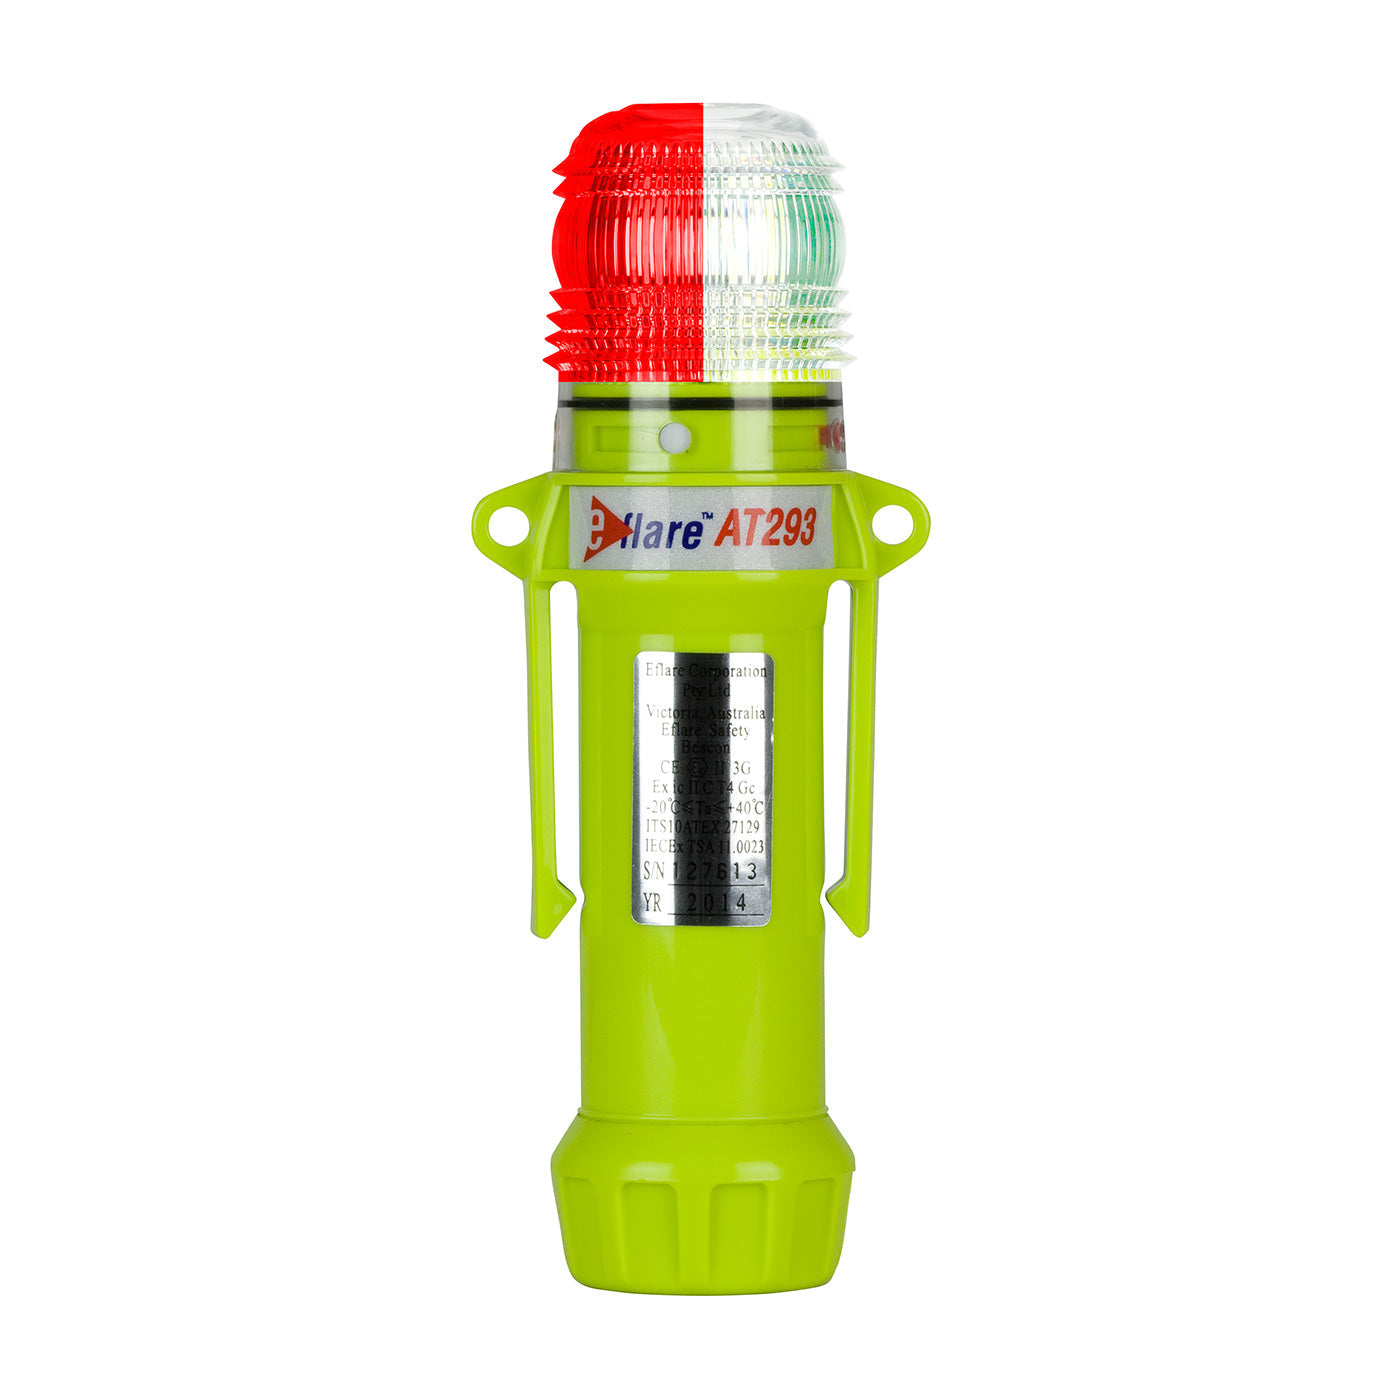 Protective Industrial Products-E-FLARE SAFETY & EMERGENCY BEACON